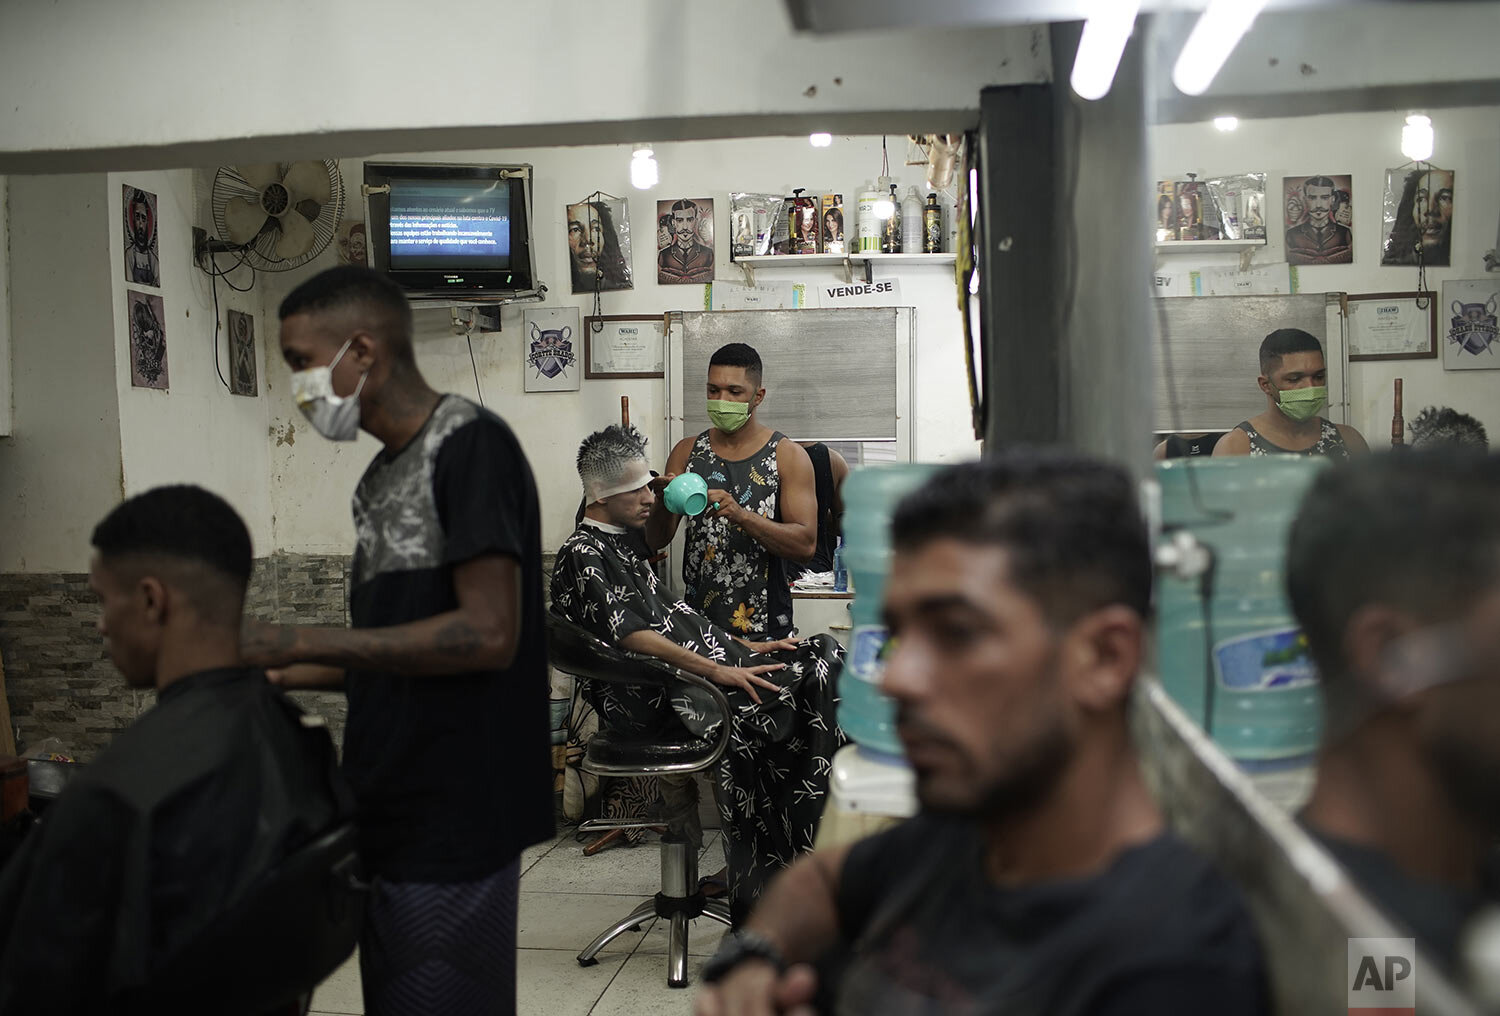  Haircutters, wearing protective face masks as a precaution against the spread of the new coronavirus, attend to clients in a barbershop in the Mandela favela of Rio de Janeiro, Brazil, April 21, 2020. (AP Photo/Silvia Izquierdo) 